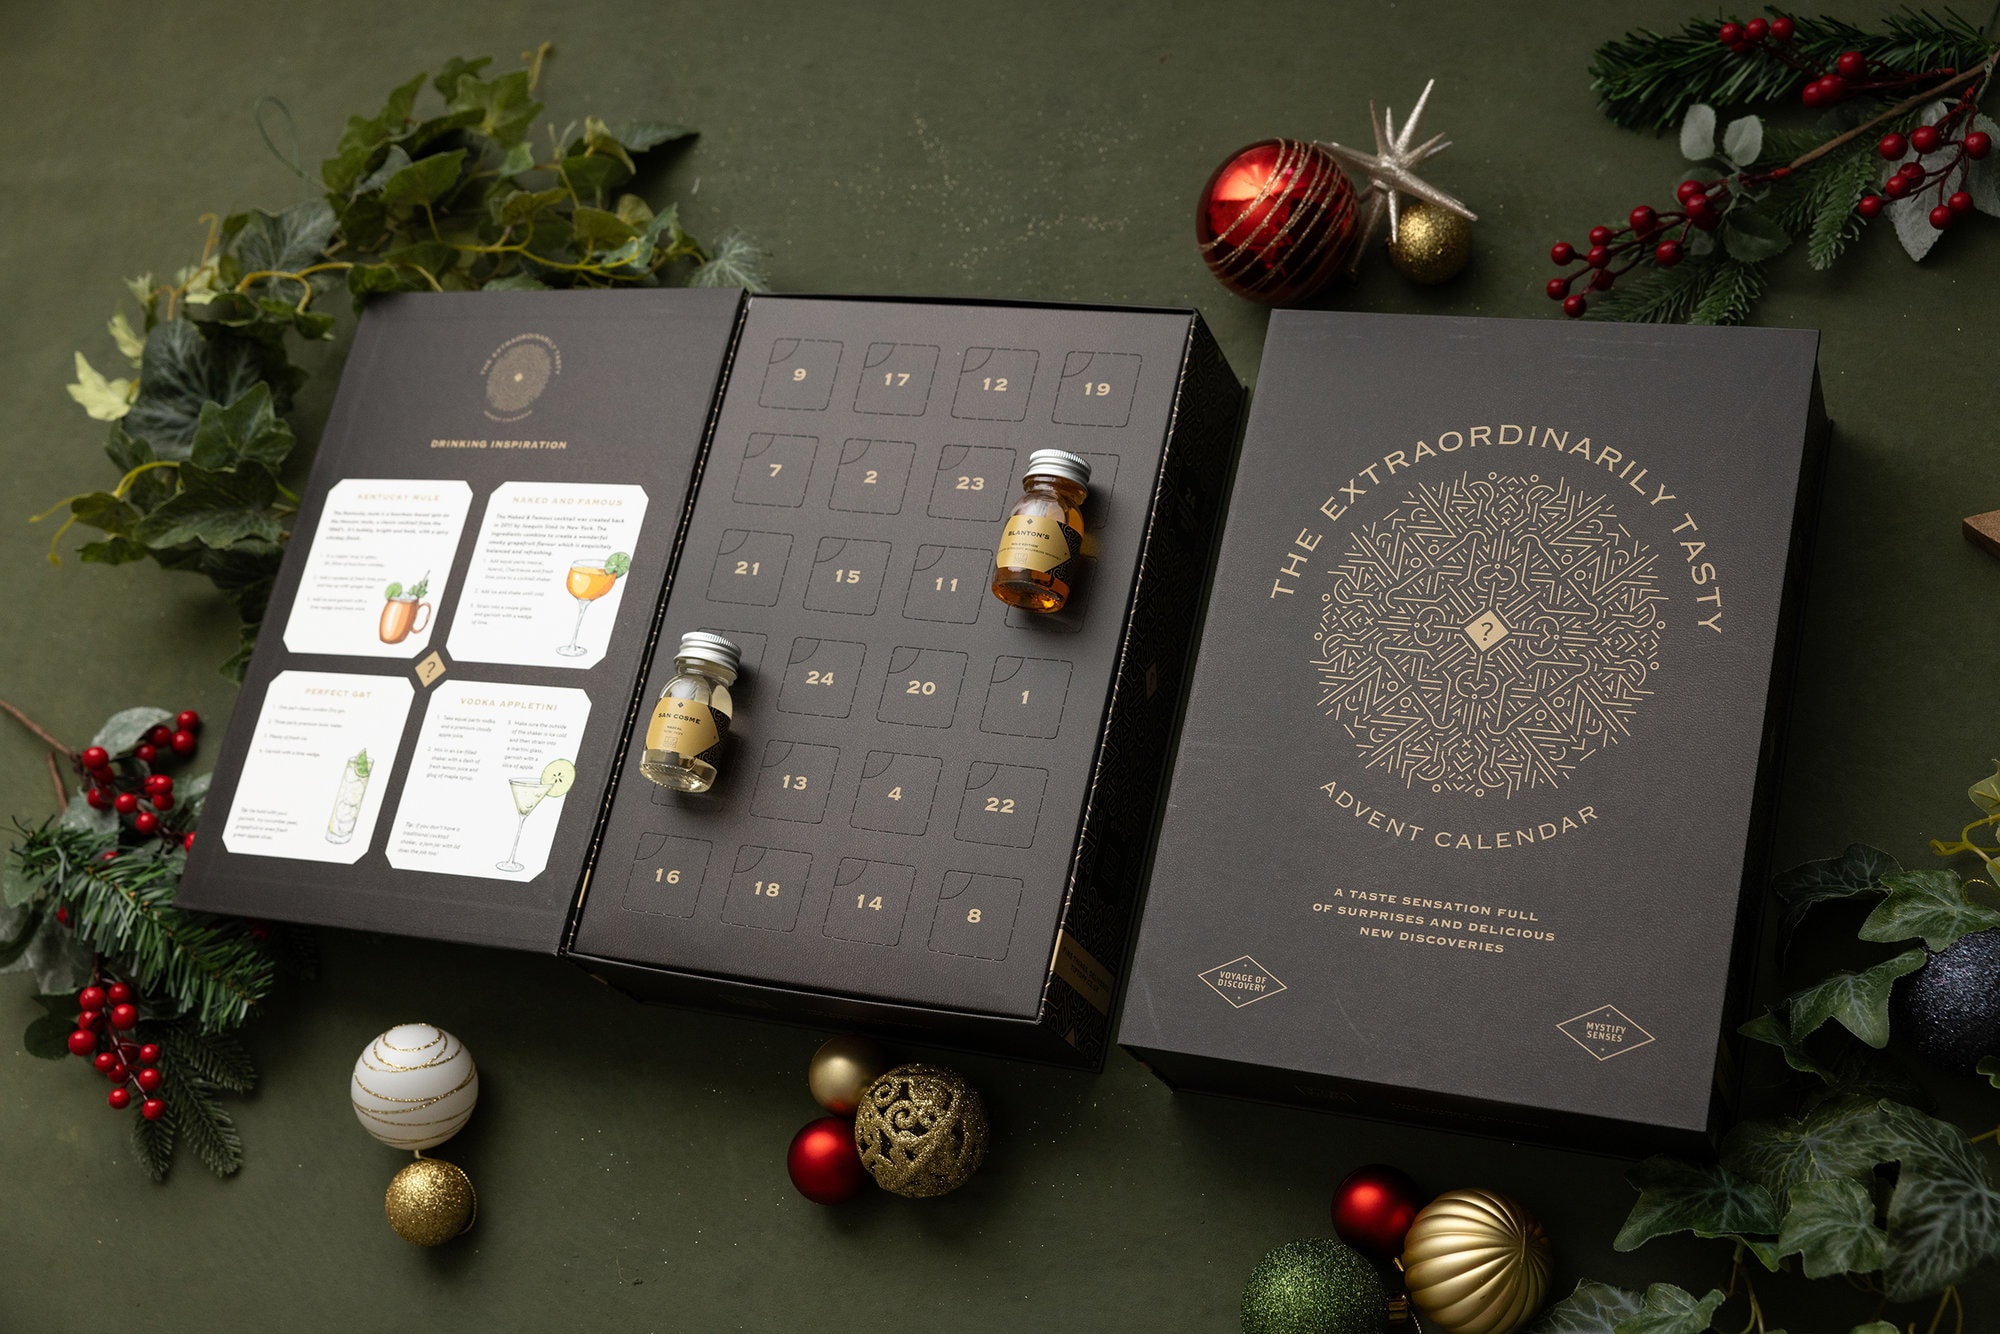 Spirit co. Advent Calendar photographed by Alison McKenny